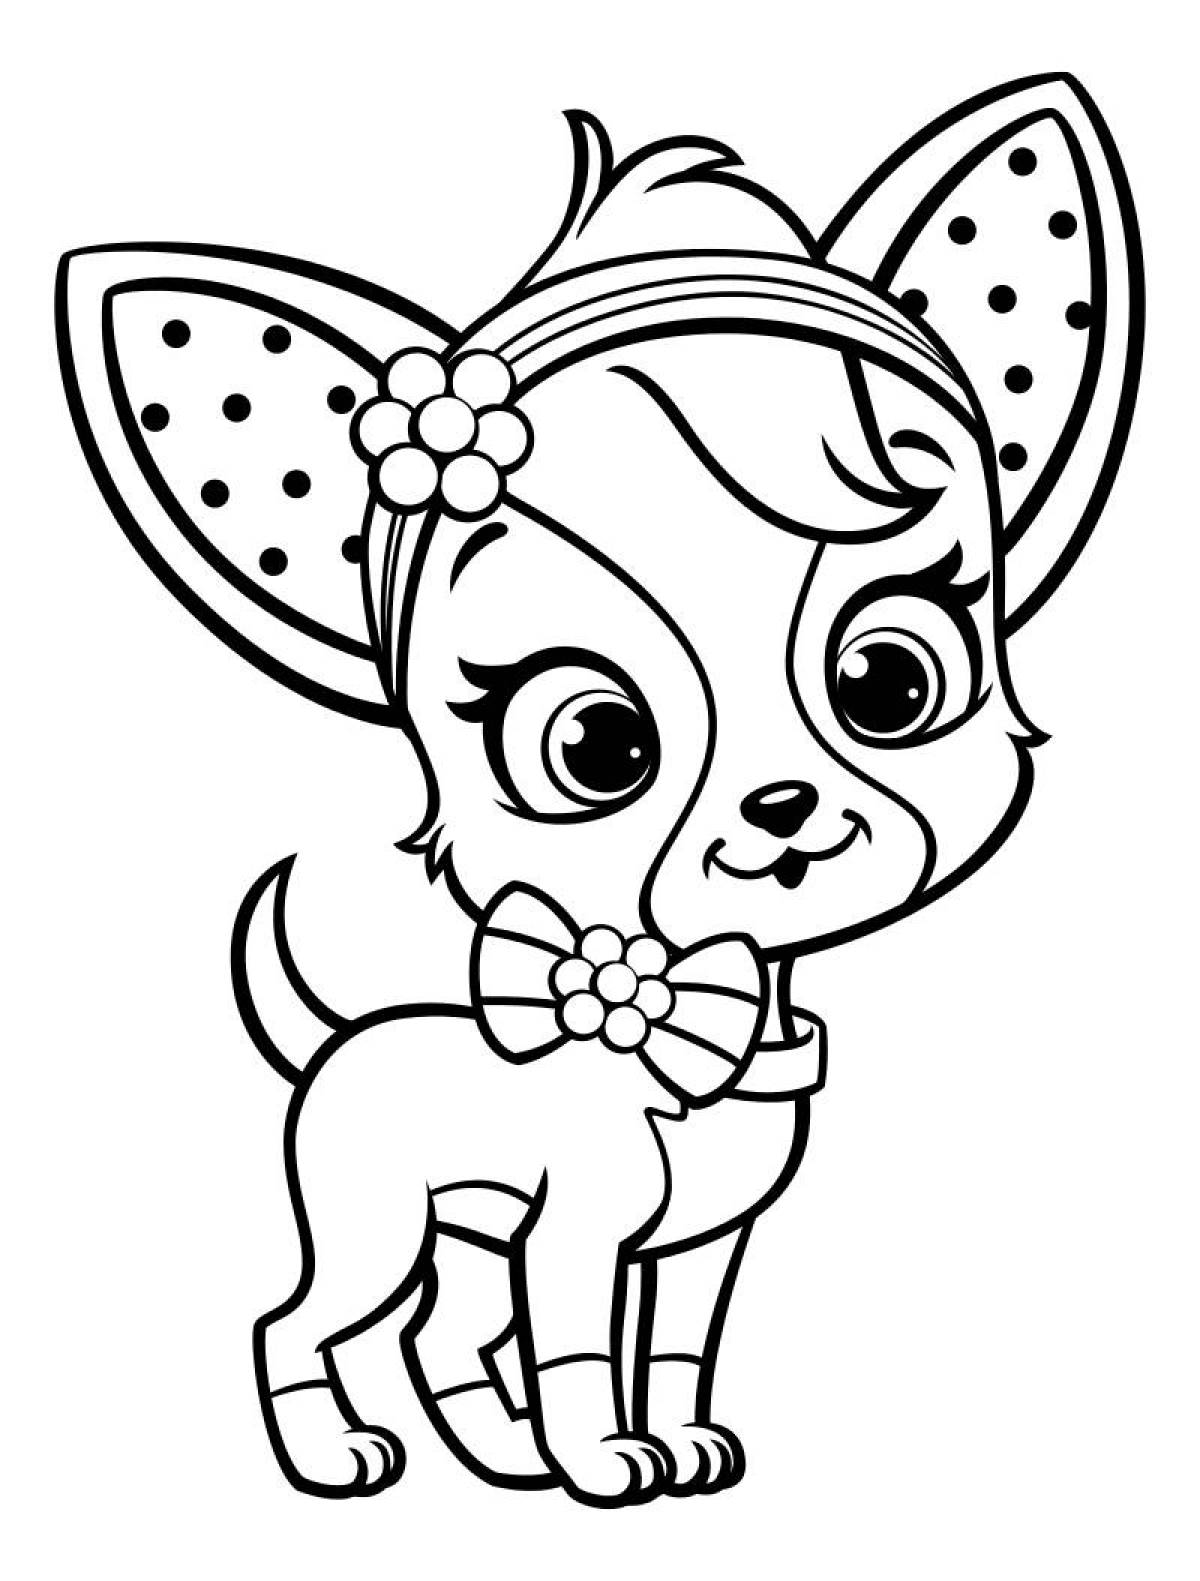 Sparkle coloring book for girls